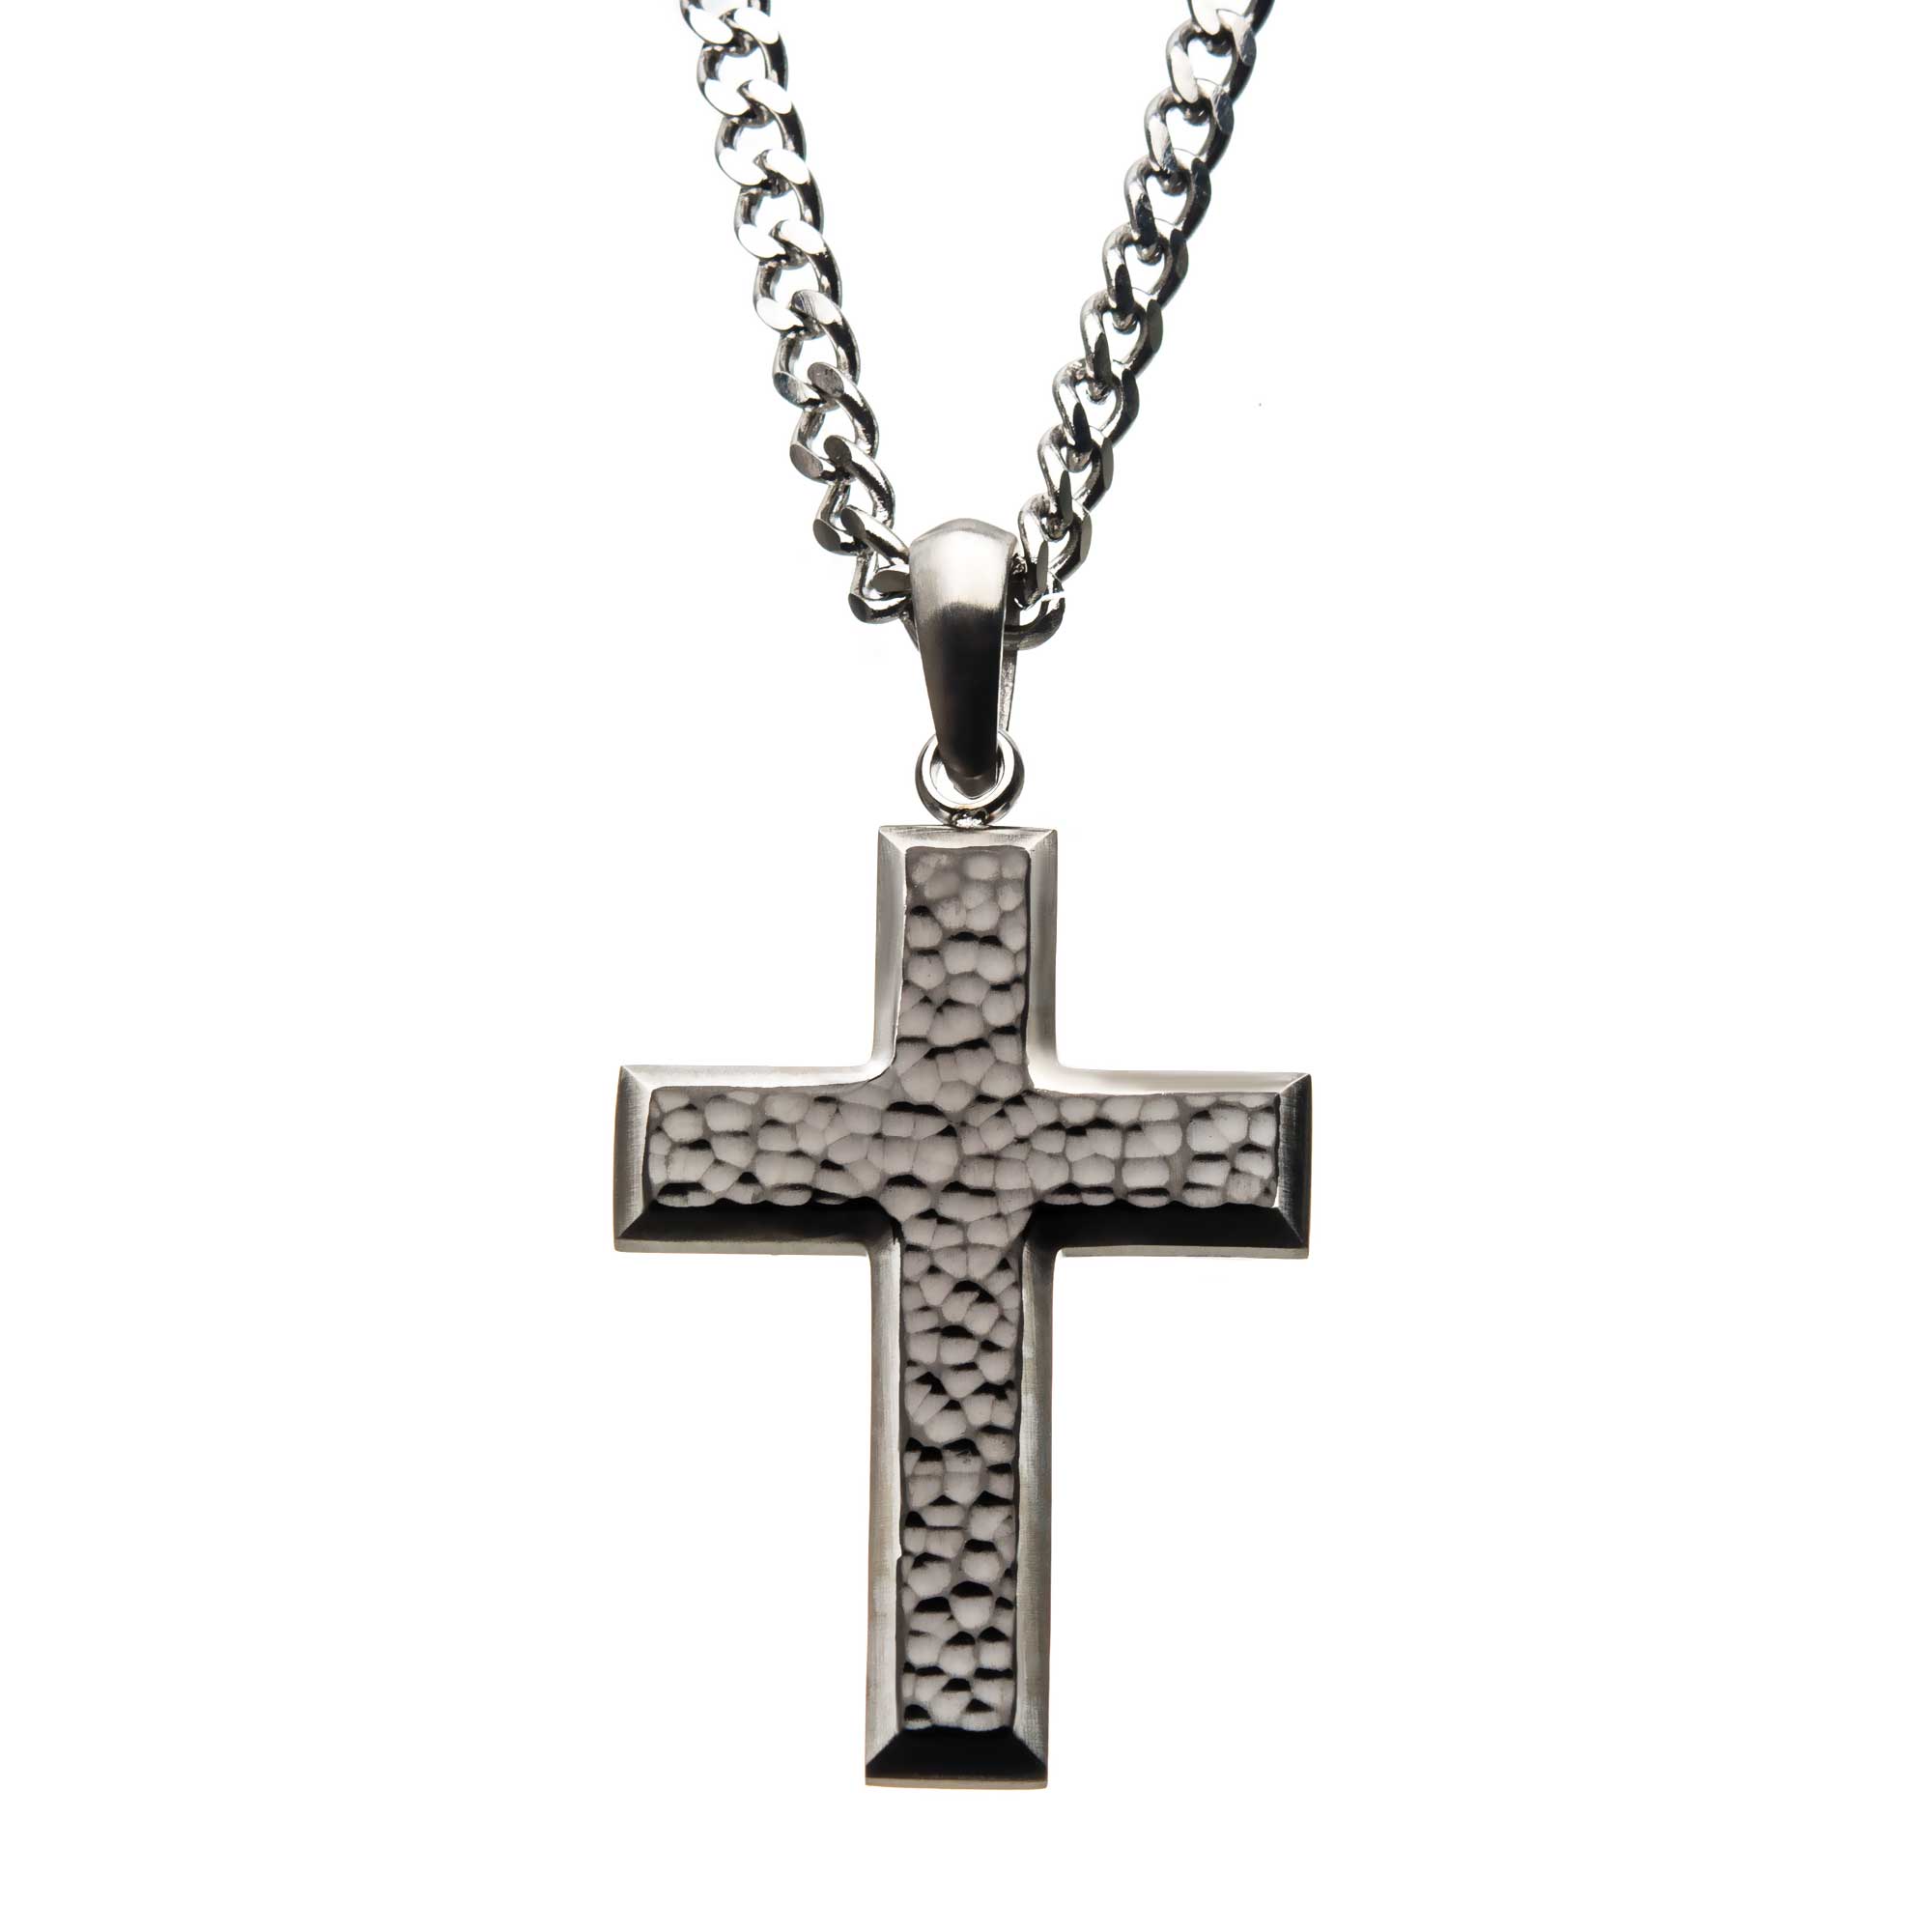 Stainless Steel Hammered Cross Pendant with Chain Lewis Jewelers, Inc. Ansonia, CT